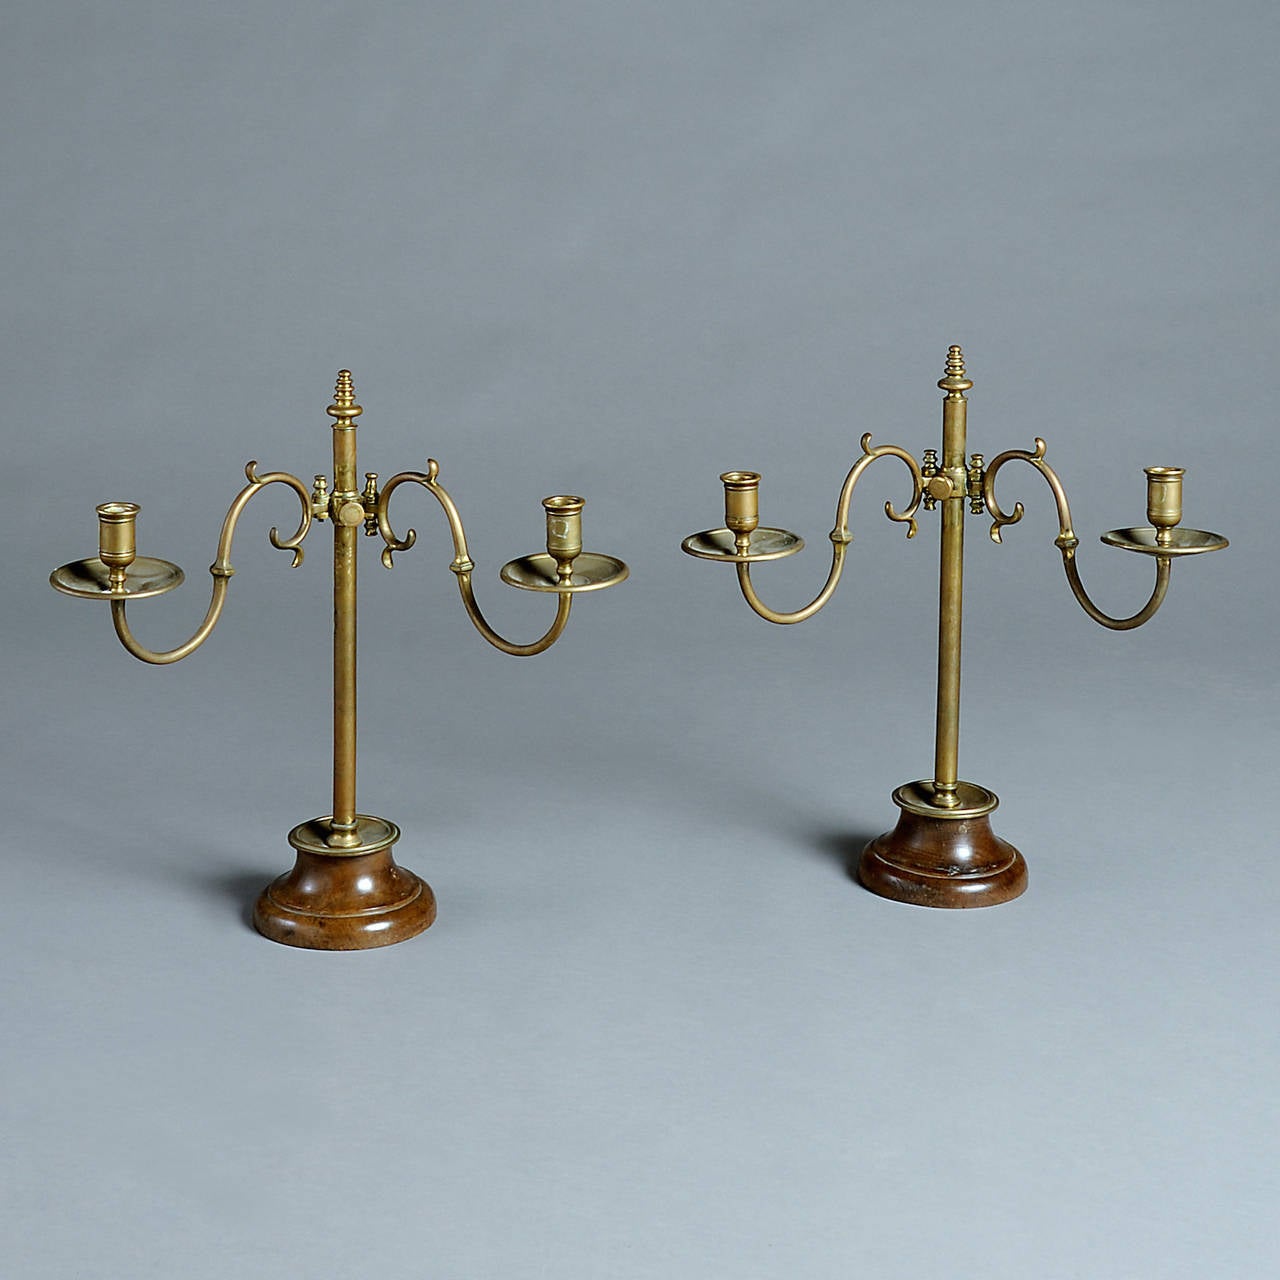 A PAIR OF LATE GEORGE III LACQUERED BRASS AND OAK CANDELABRA WITH ADJUSTABLE ARMS AND TURNED BASES, circa 1800.